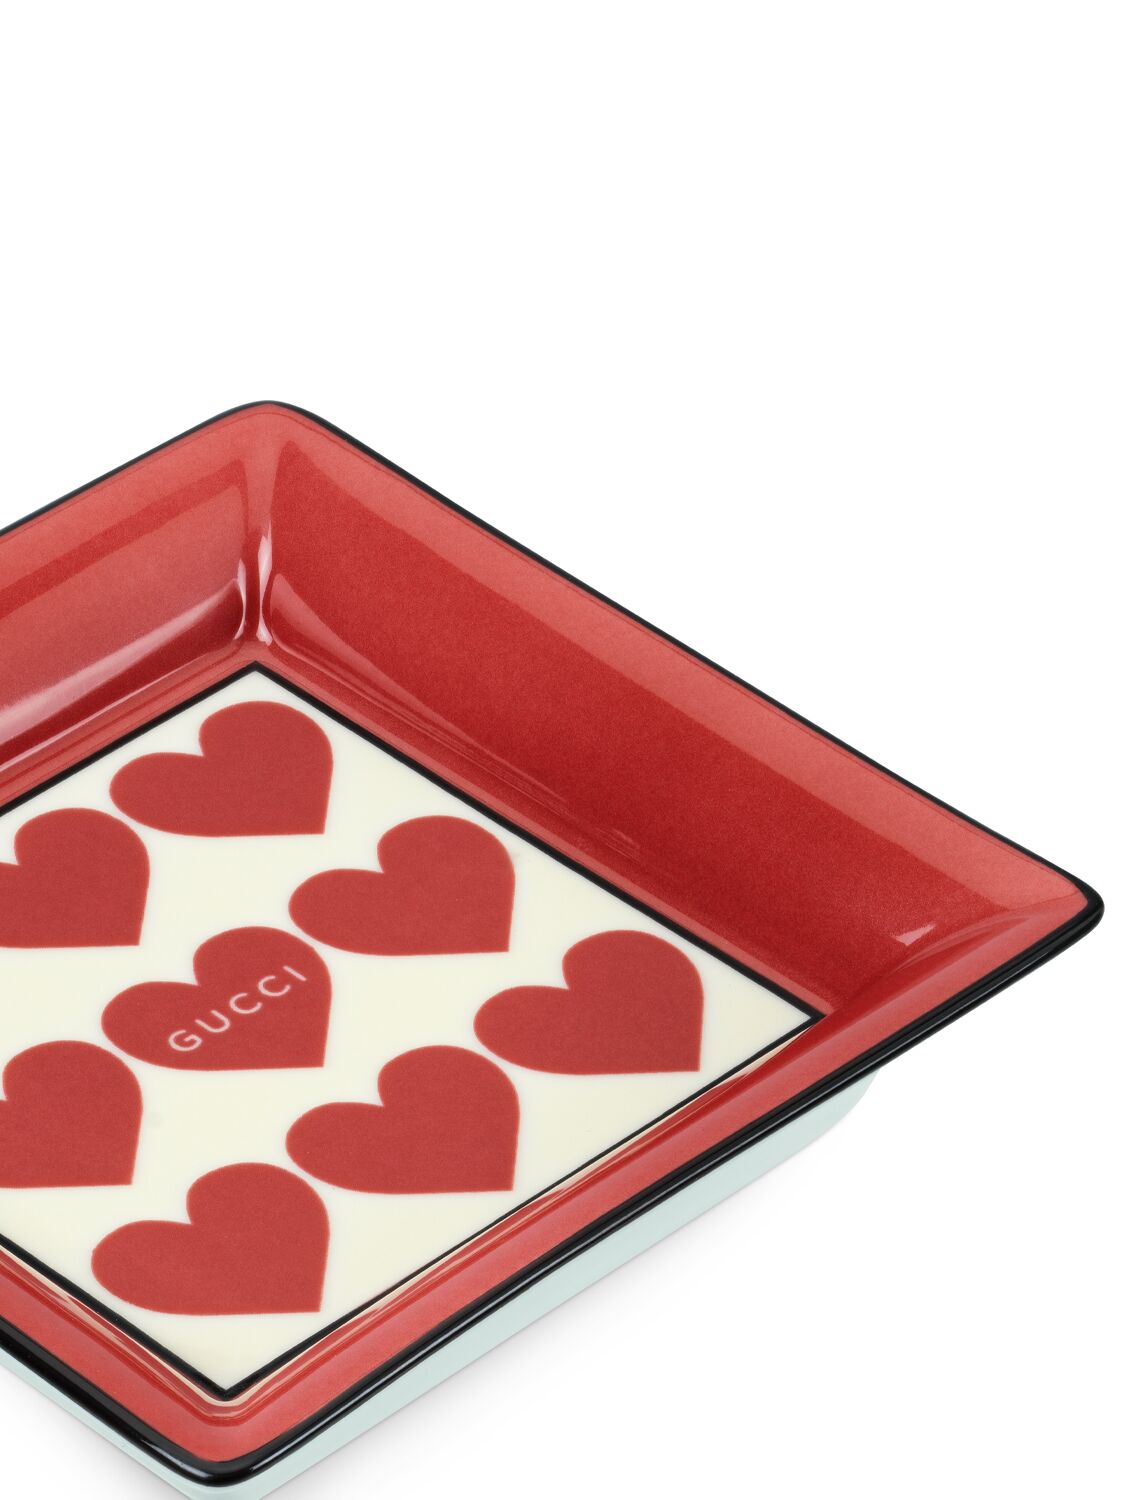 Shop Gucci Hearts Square Porcelain Ashtray In Red,ivory